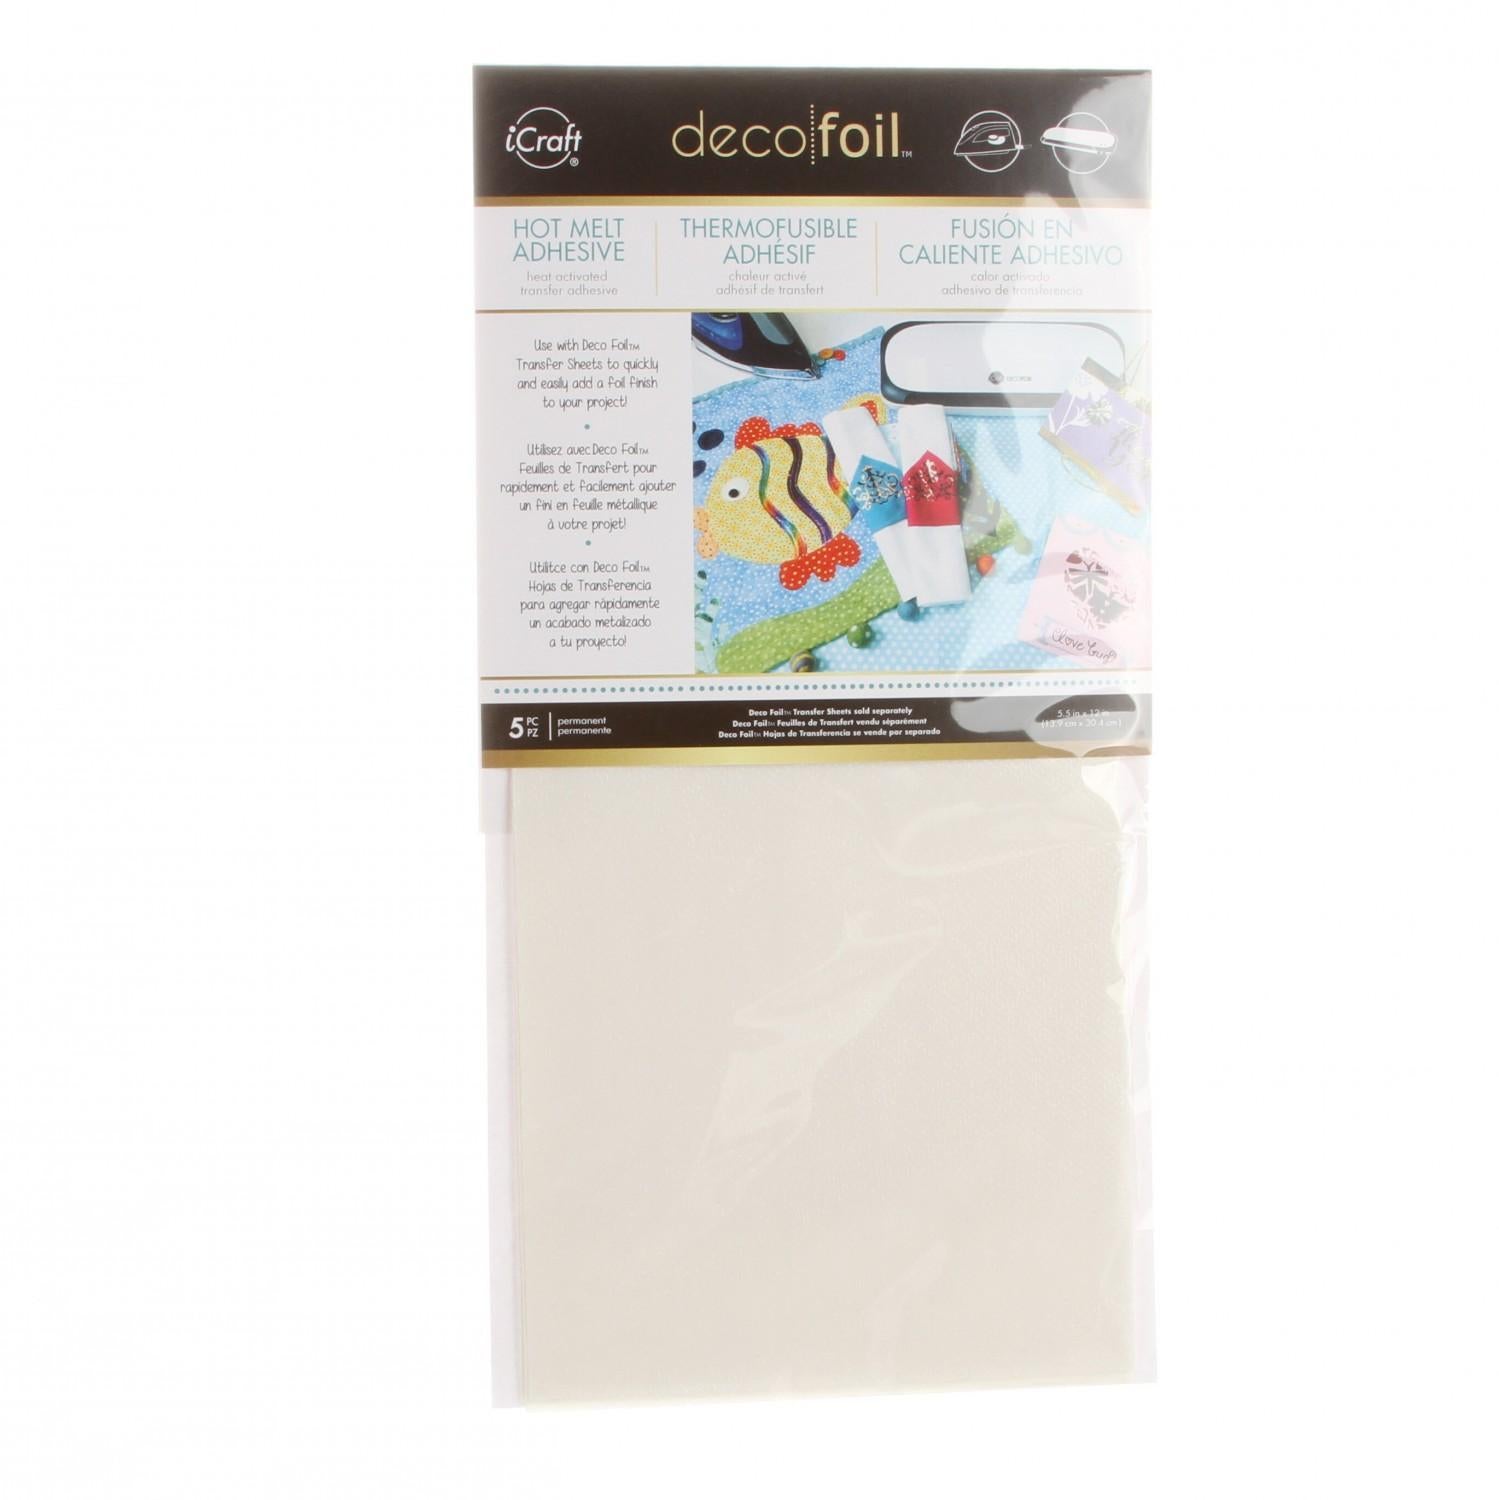 iCraft Deco Foil Hot Melt Adhesive 5-1/2in x 12in – Merrily We Quilt Along